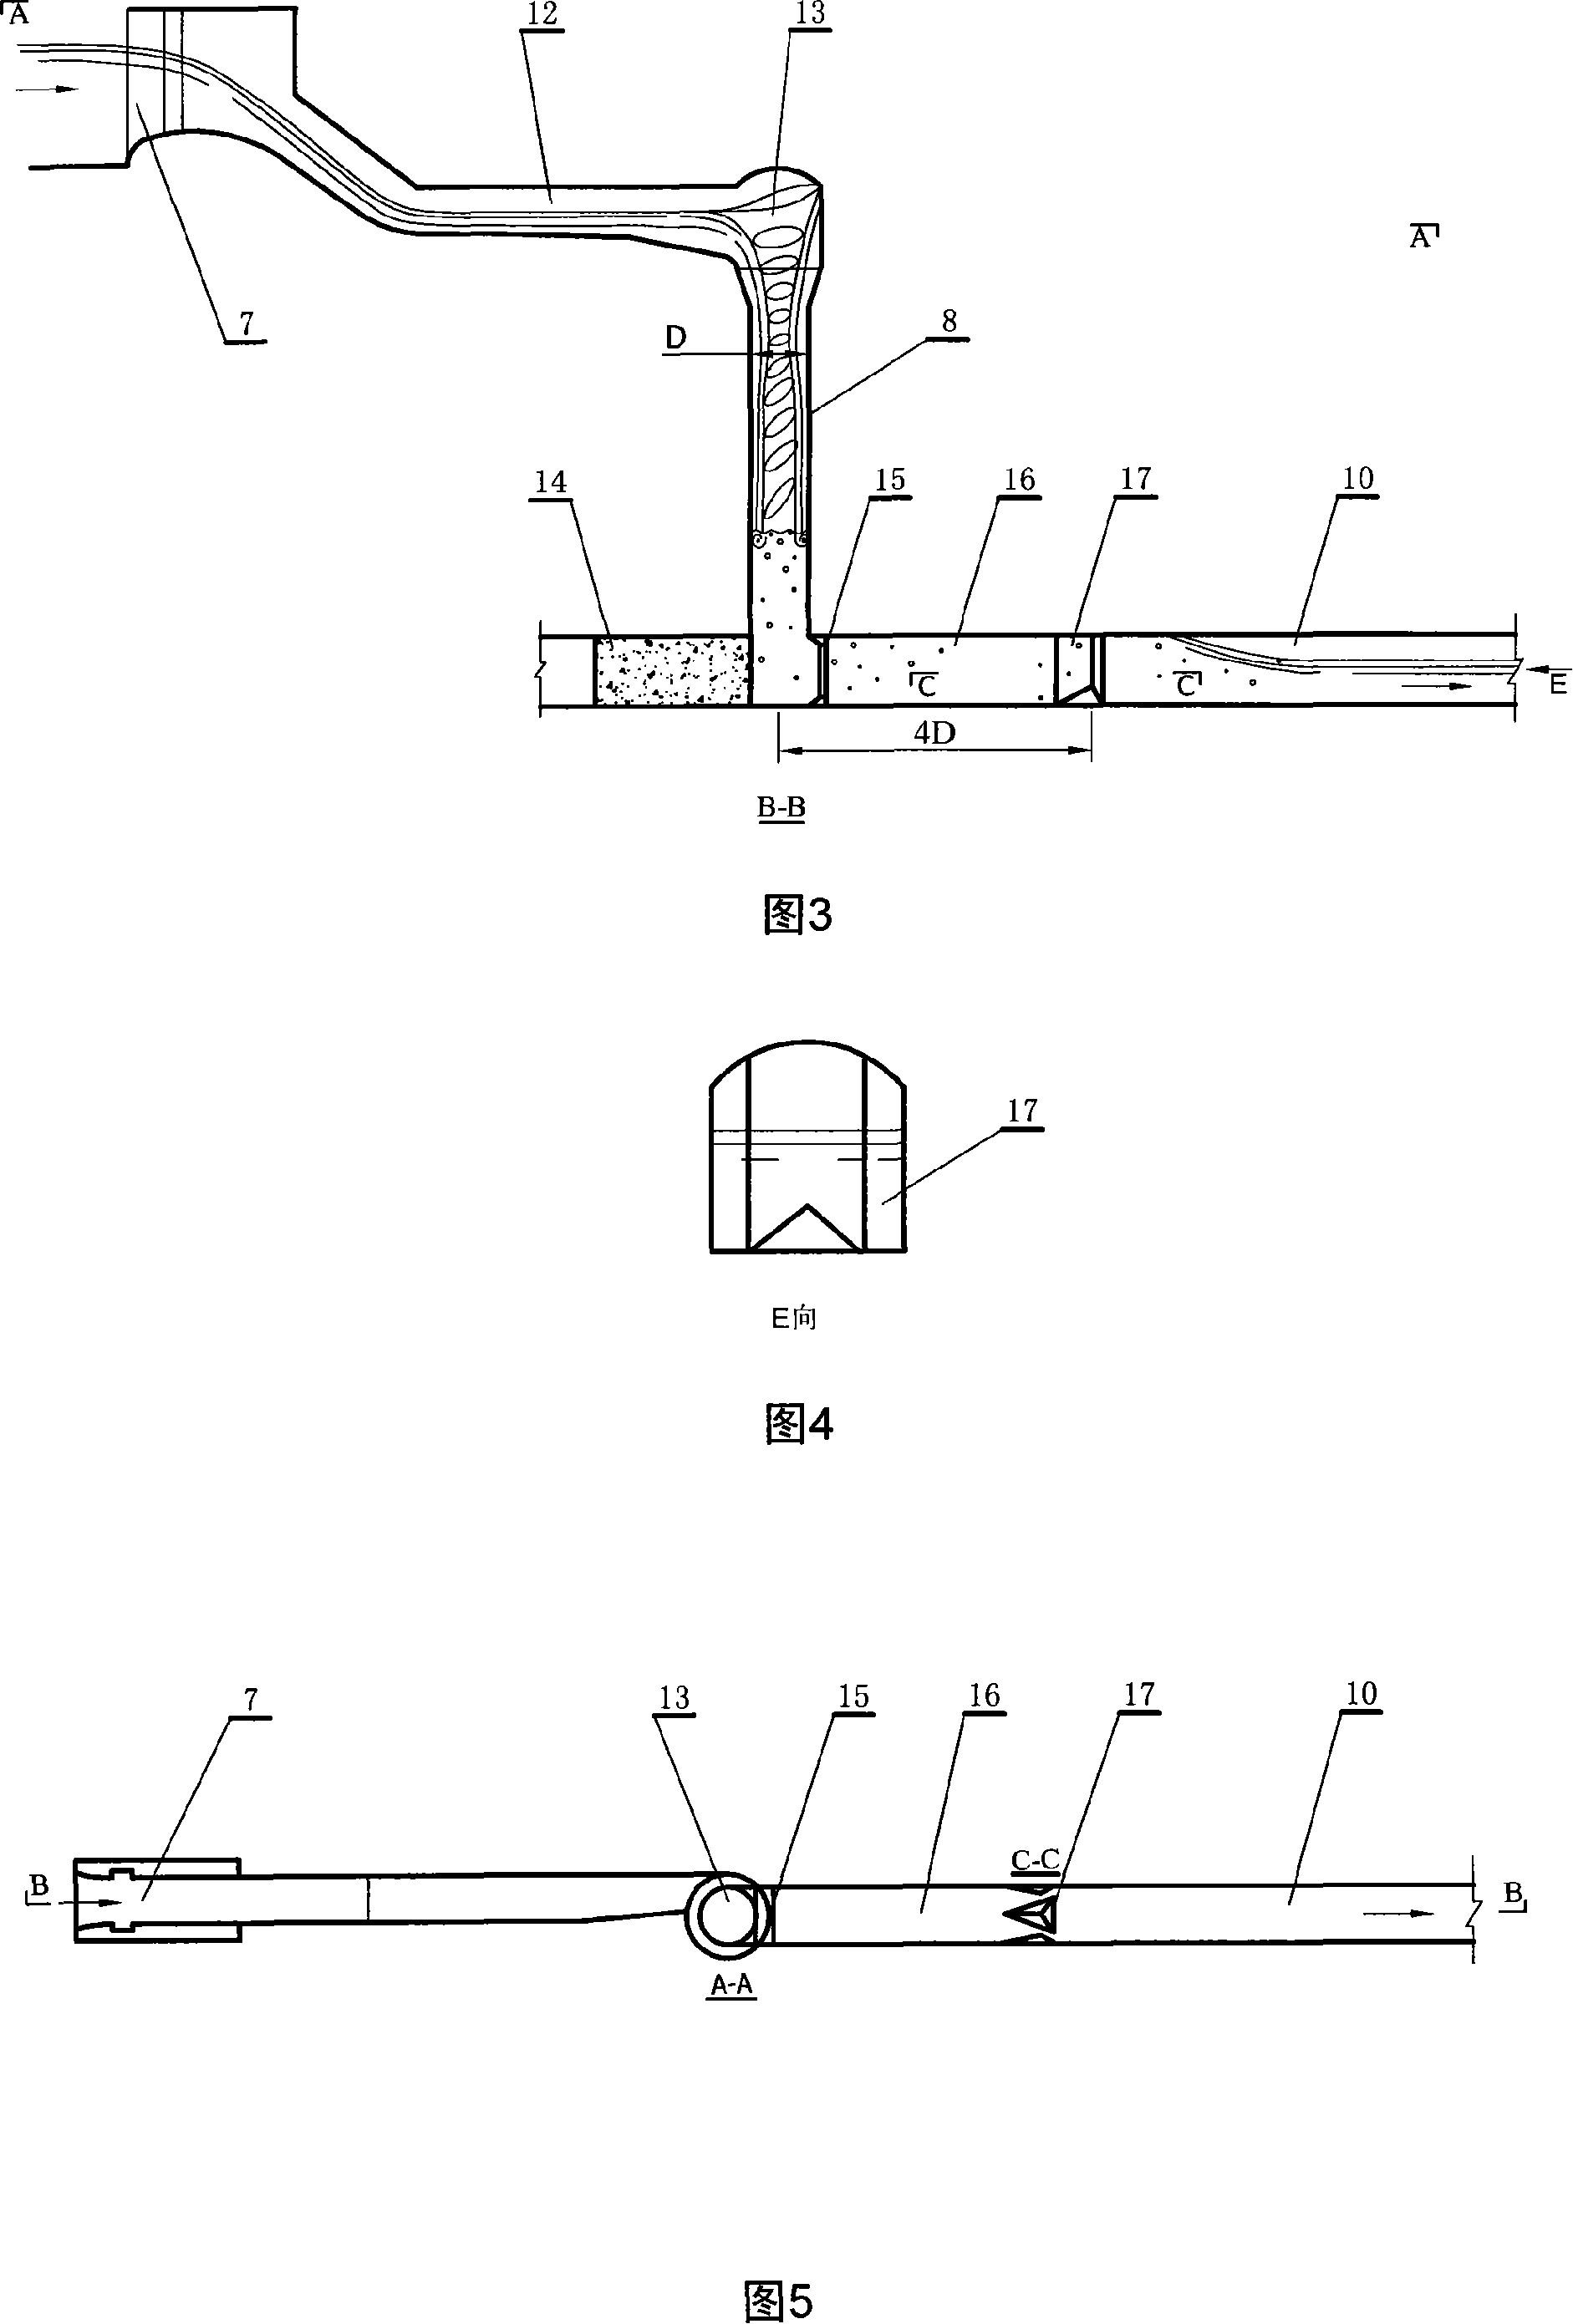 Flood discharging method and flood discharging tunnel employing rotational flow and strong moisture mixing energy dissipation